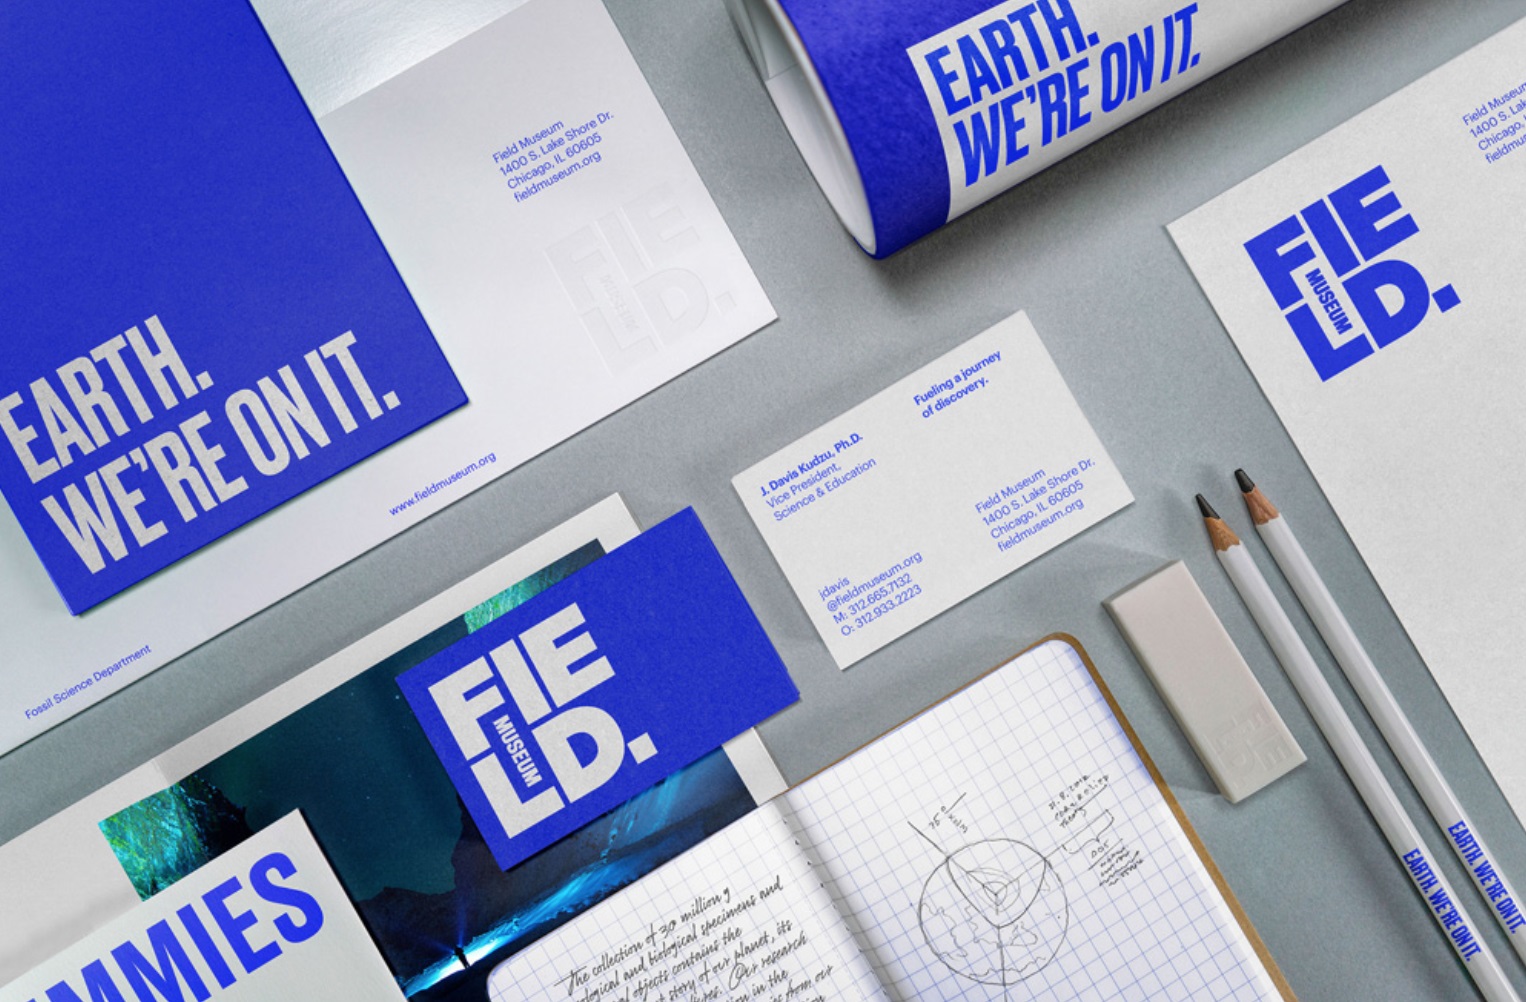 Bright blue and white Field Museum–branded business cards, notecards, pencils, and letterhead are neatly laid out on top of a grey surface.